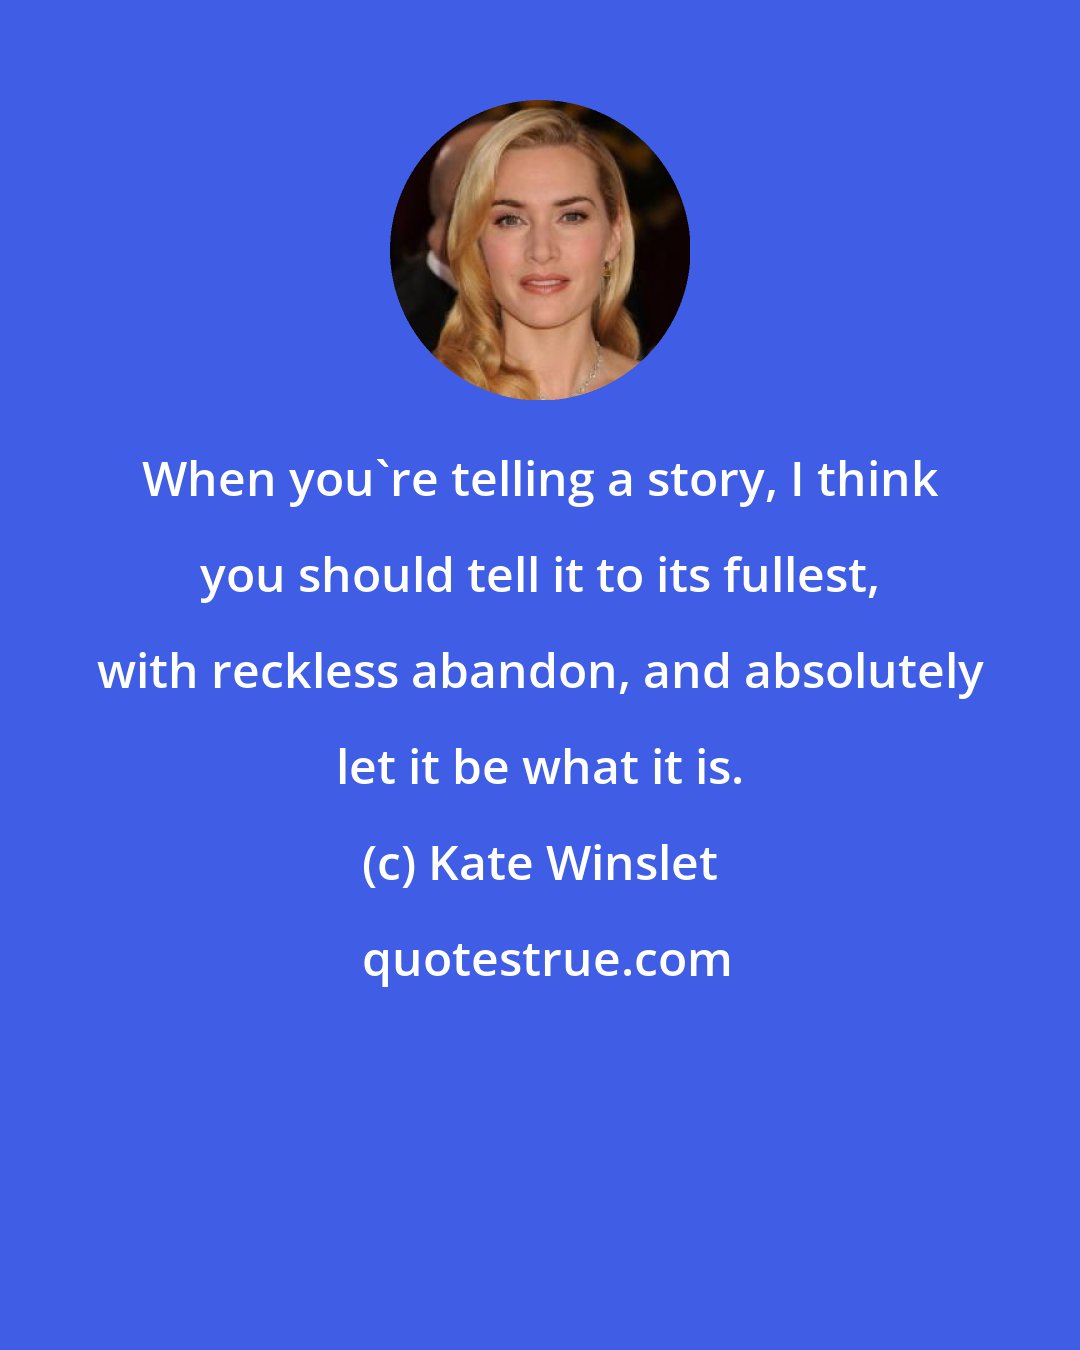 Kate Winslet: When you're telling a story, I think you should tell it to its fullest, with reckless abandon, and absolutely let it be what it is.